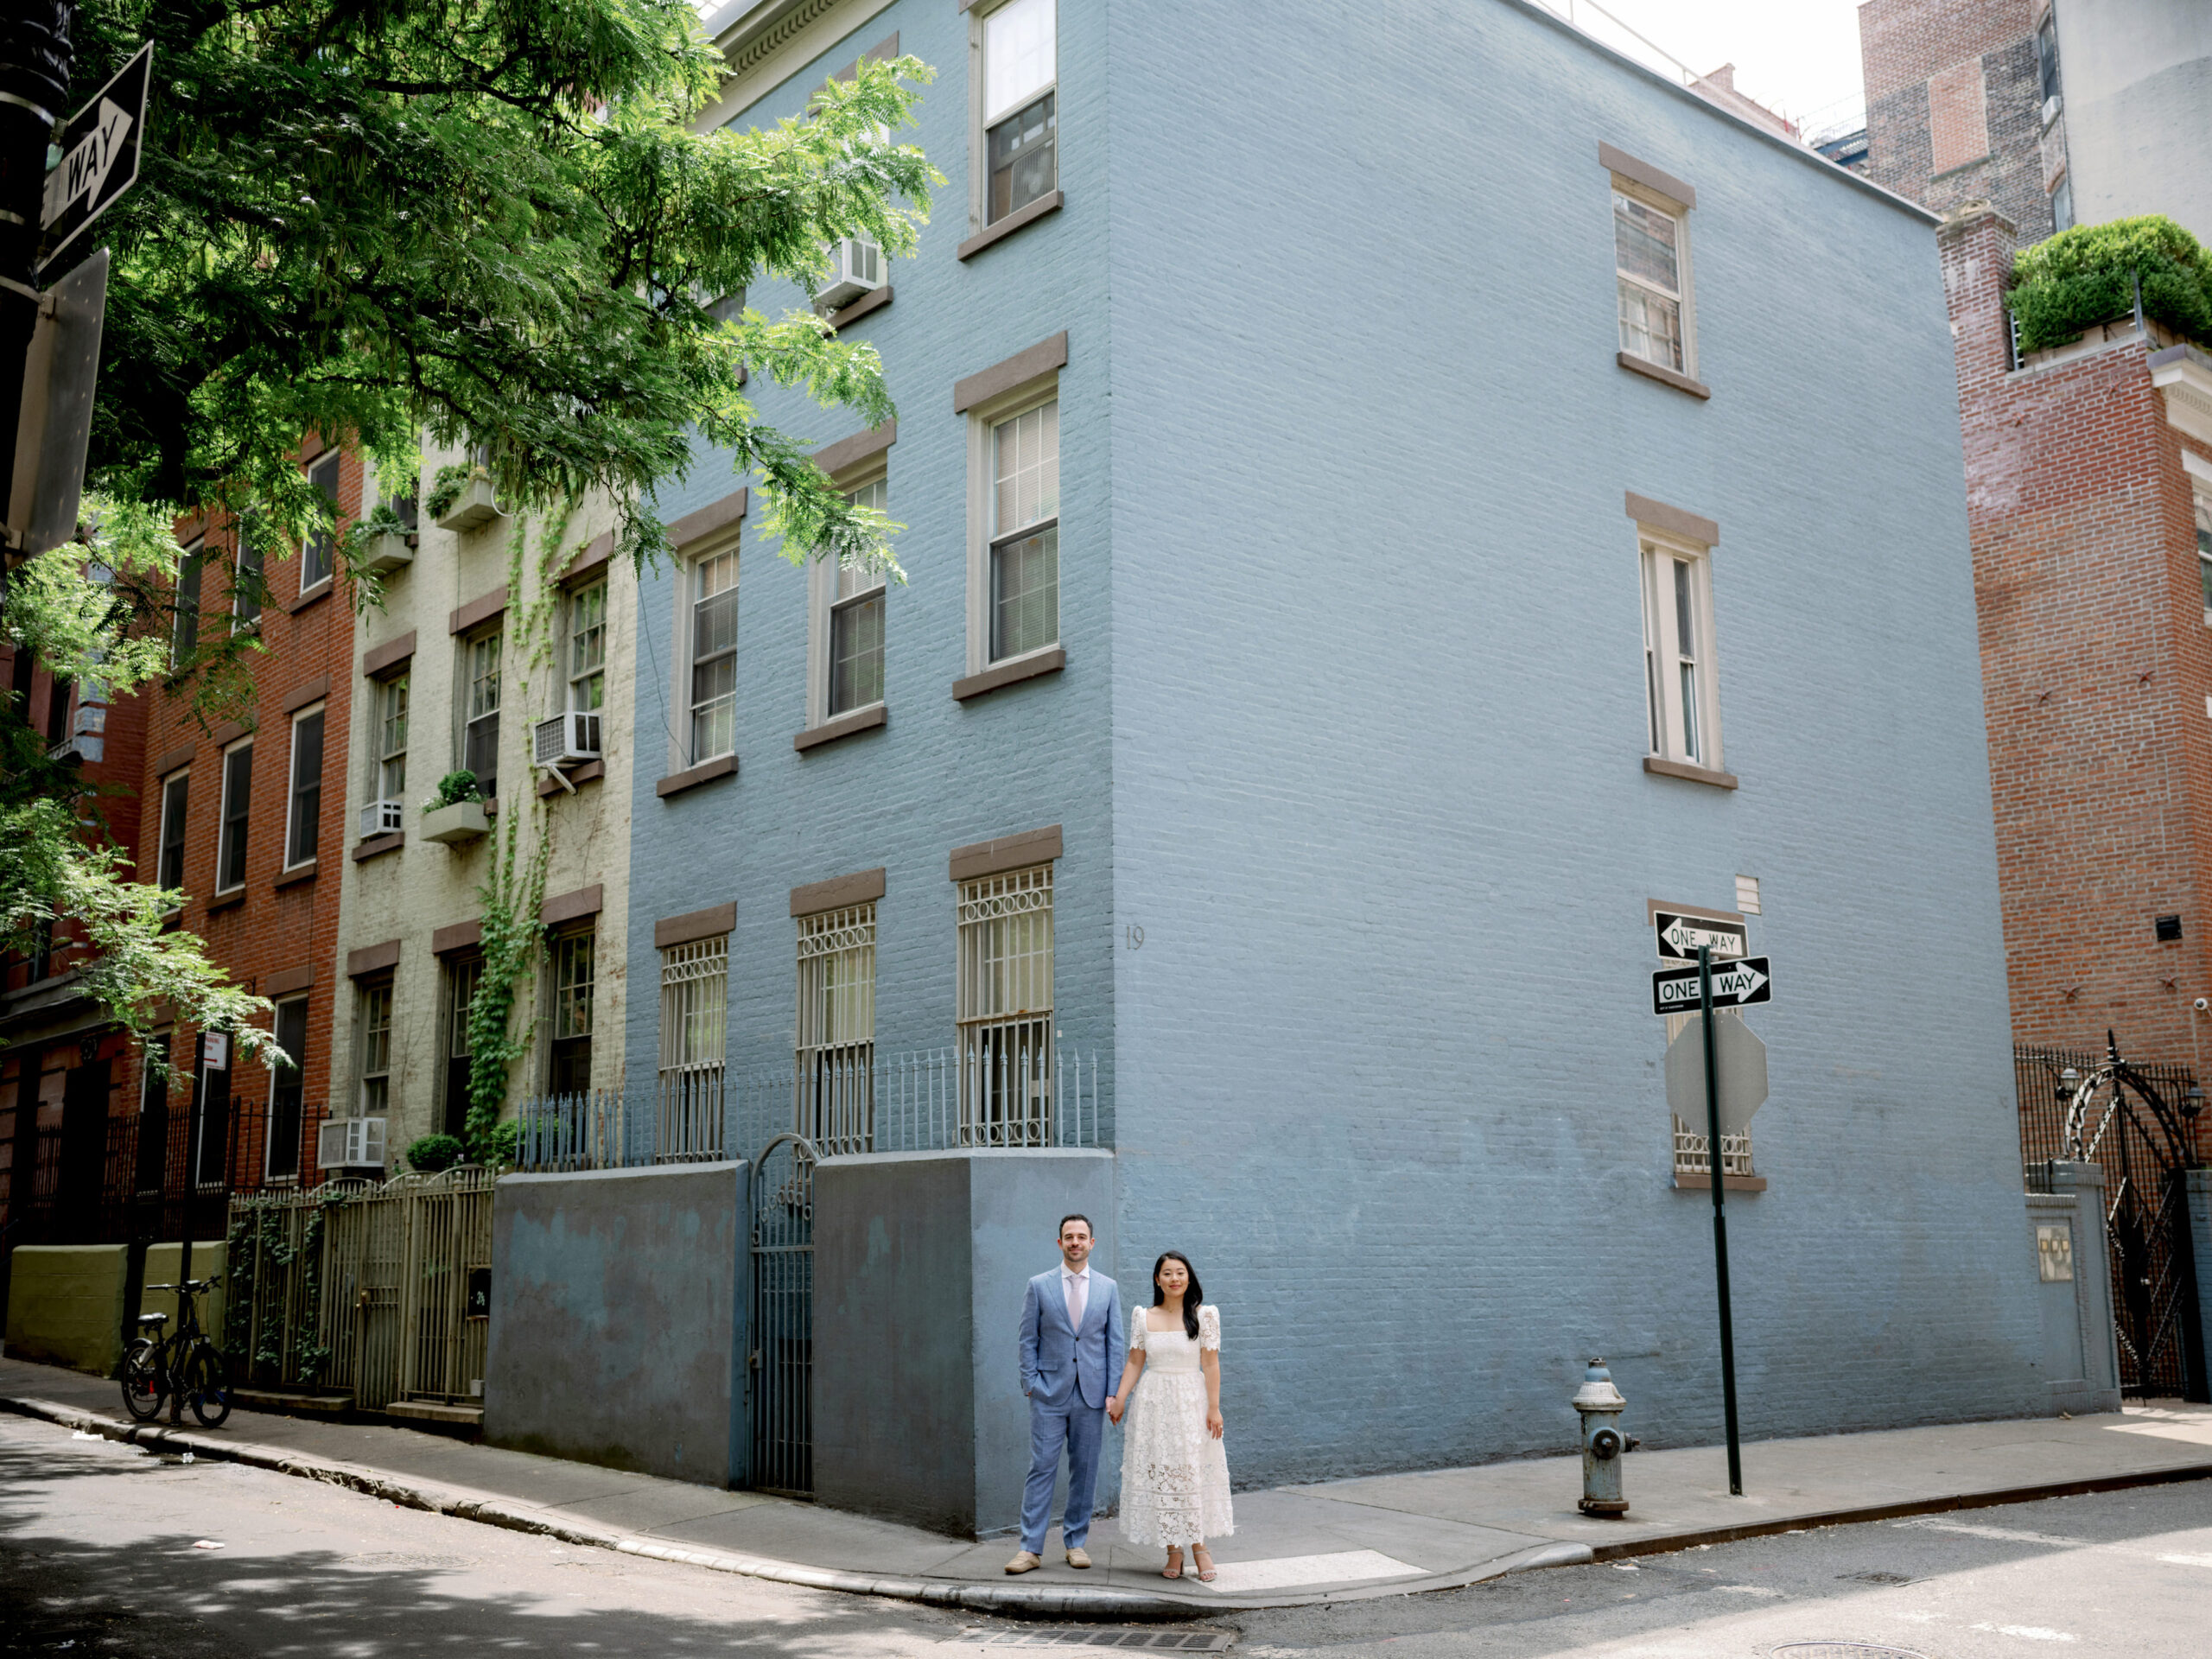 The engaged couple are standing with a blue building in the background. Engagement photos image by Jenny Fu Studio